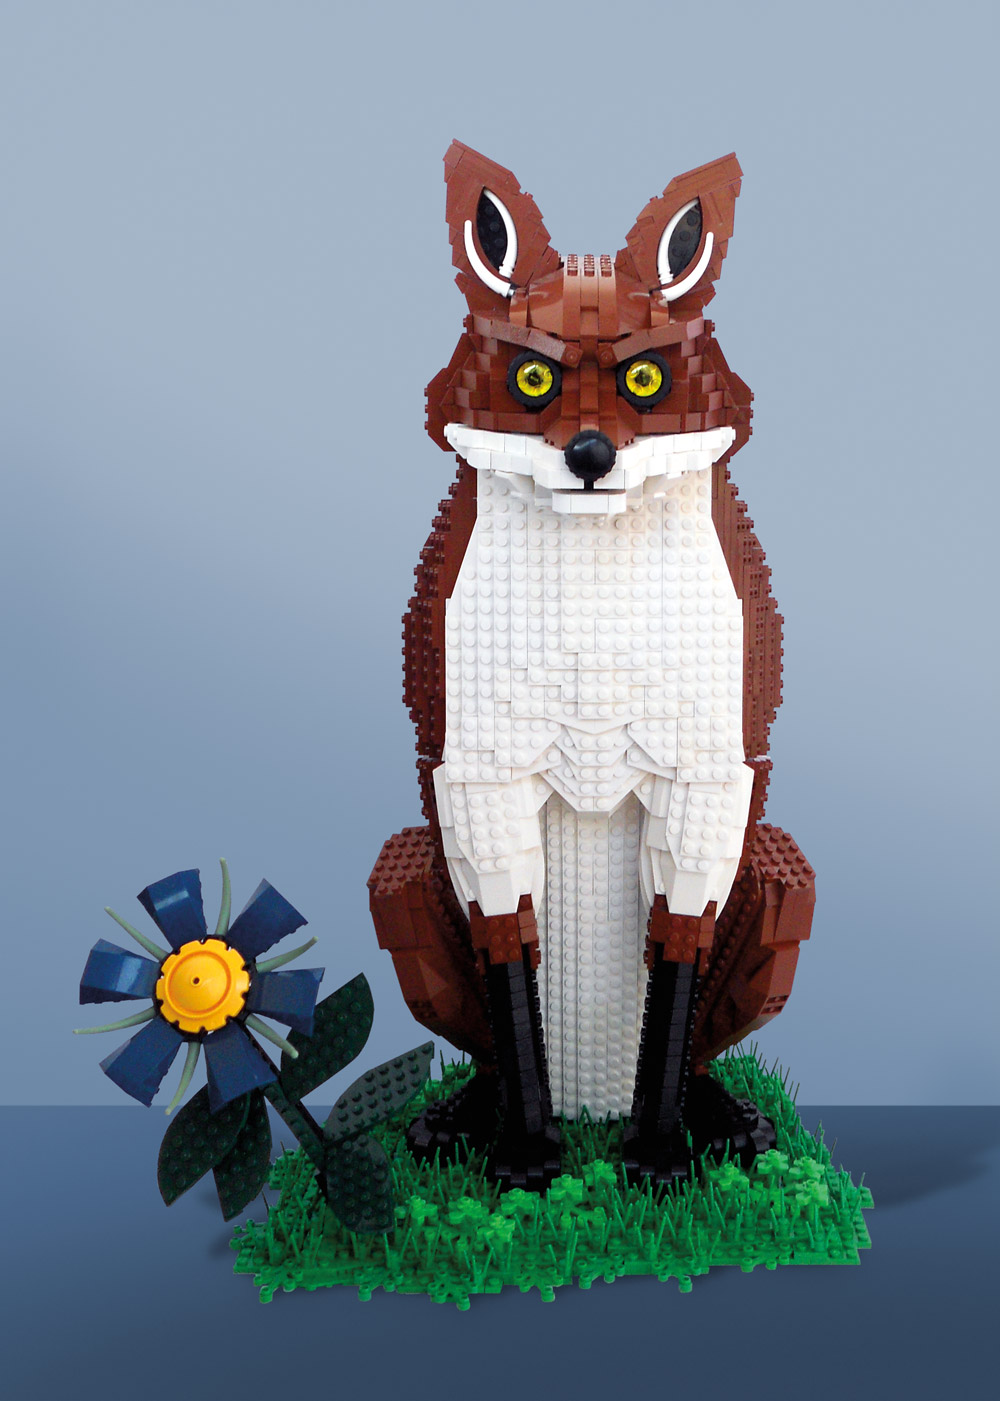 Beautiful LEGO Wild! Book by Doyle | Daily design inspiration for creatives Inspiration Grid